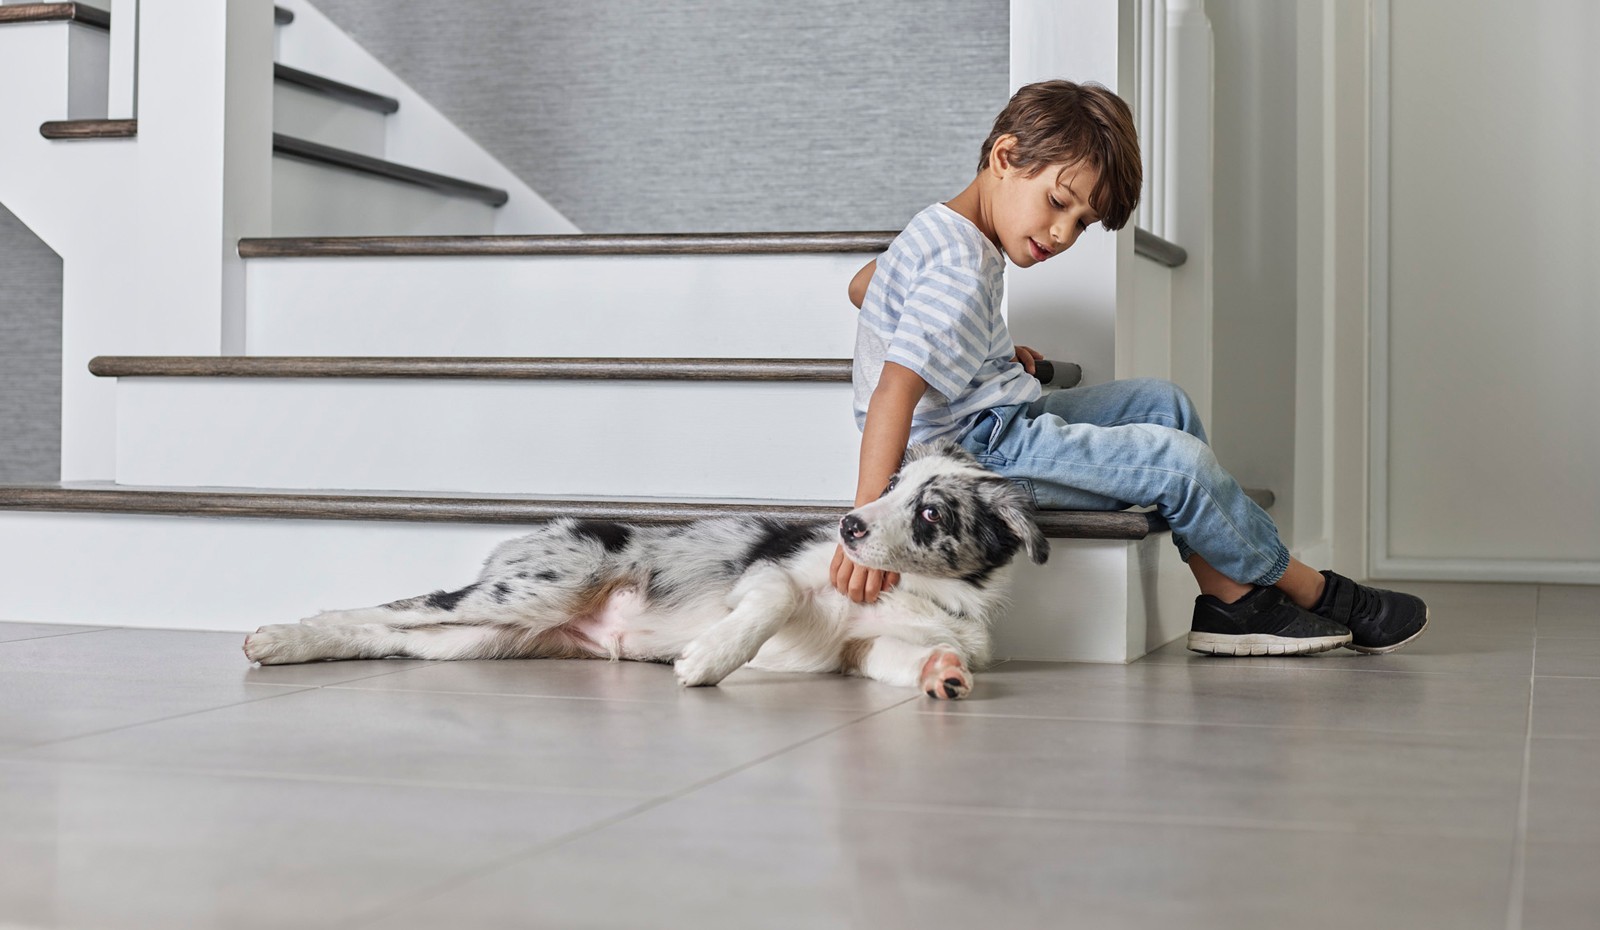 The Perfect Flooring Choice Throughout Your Home